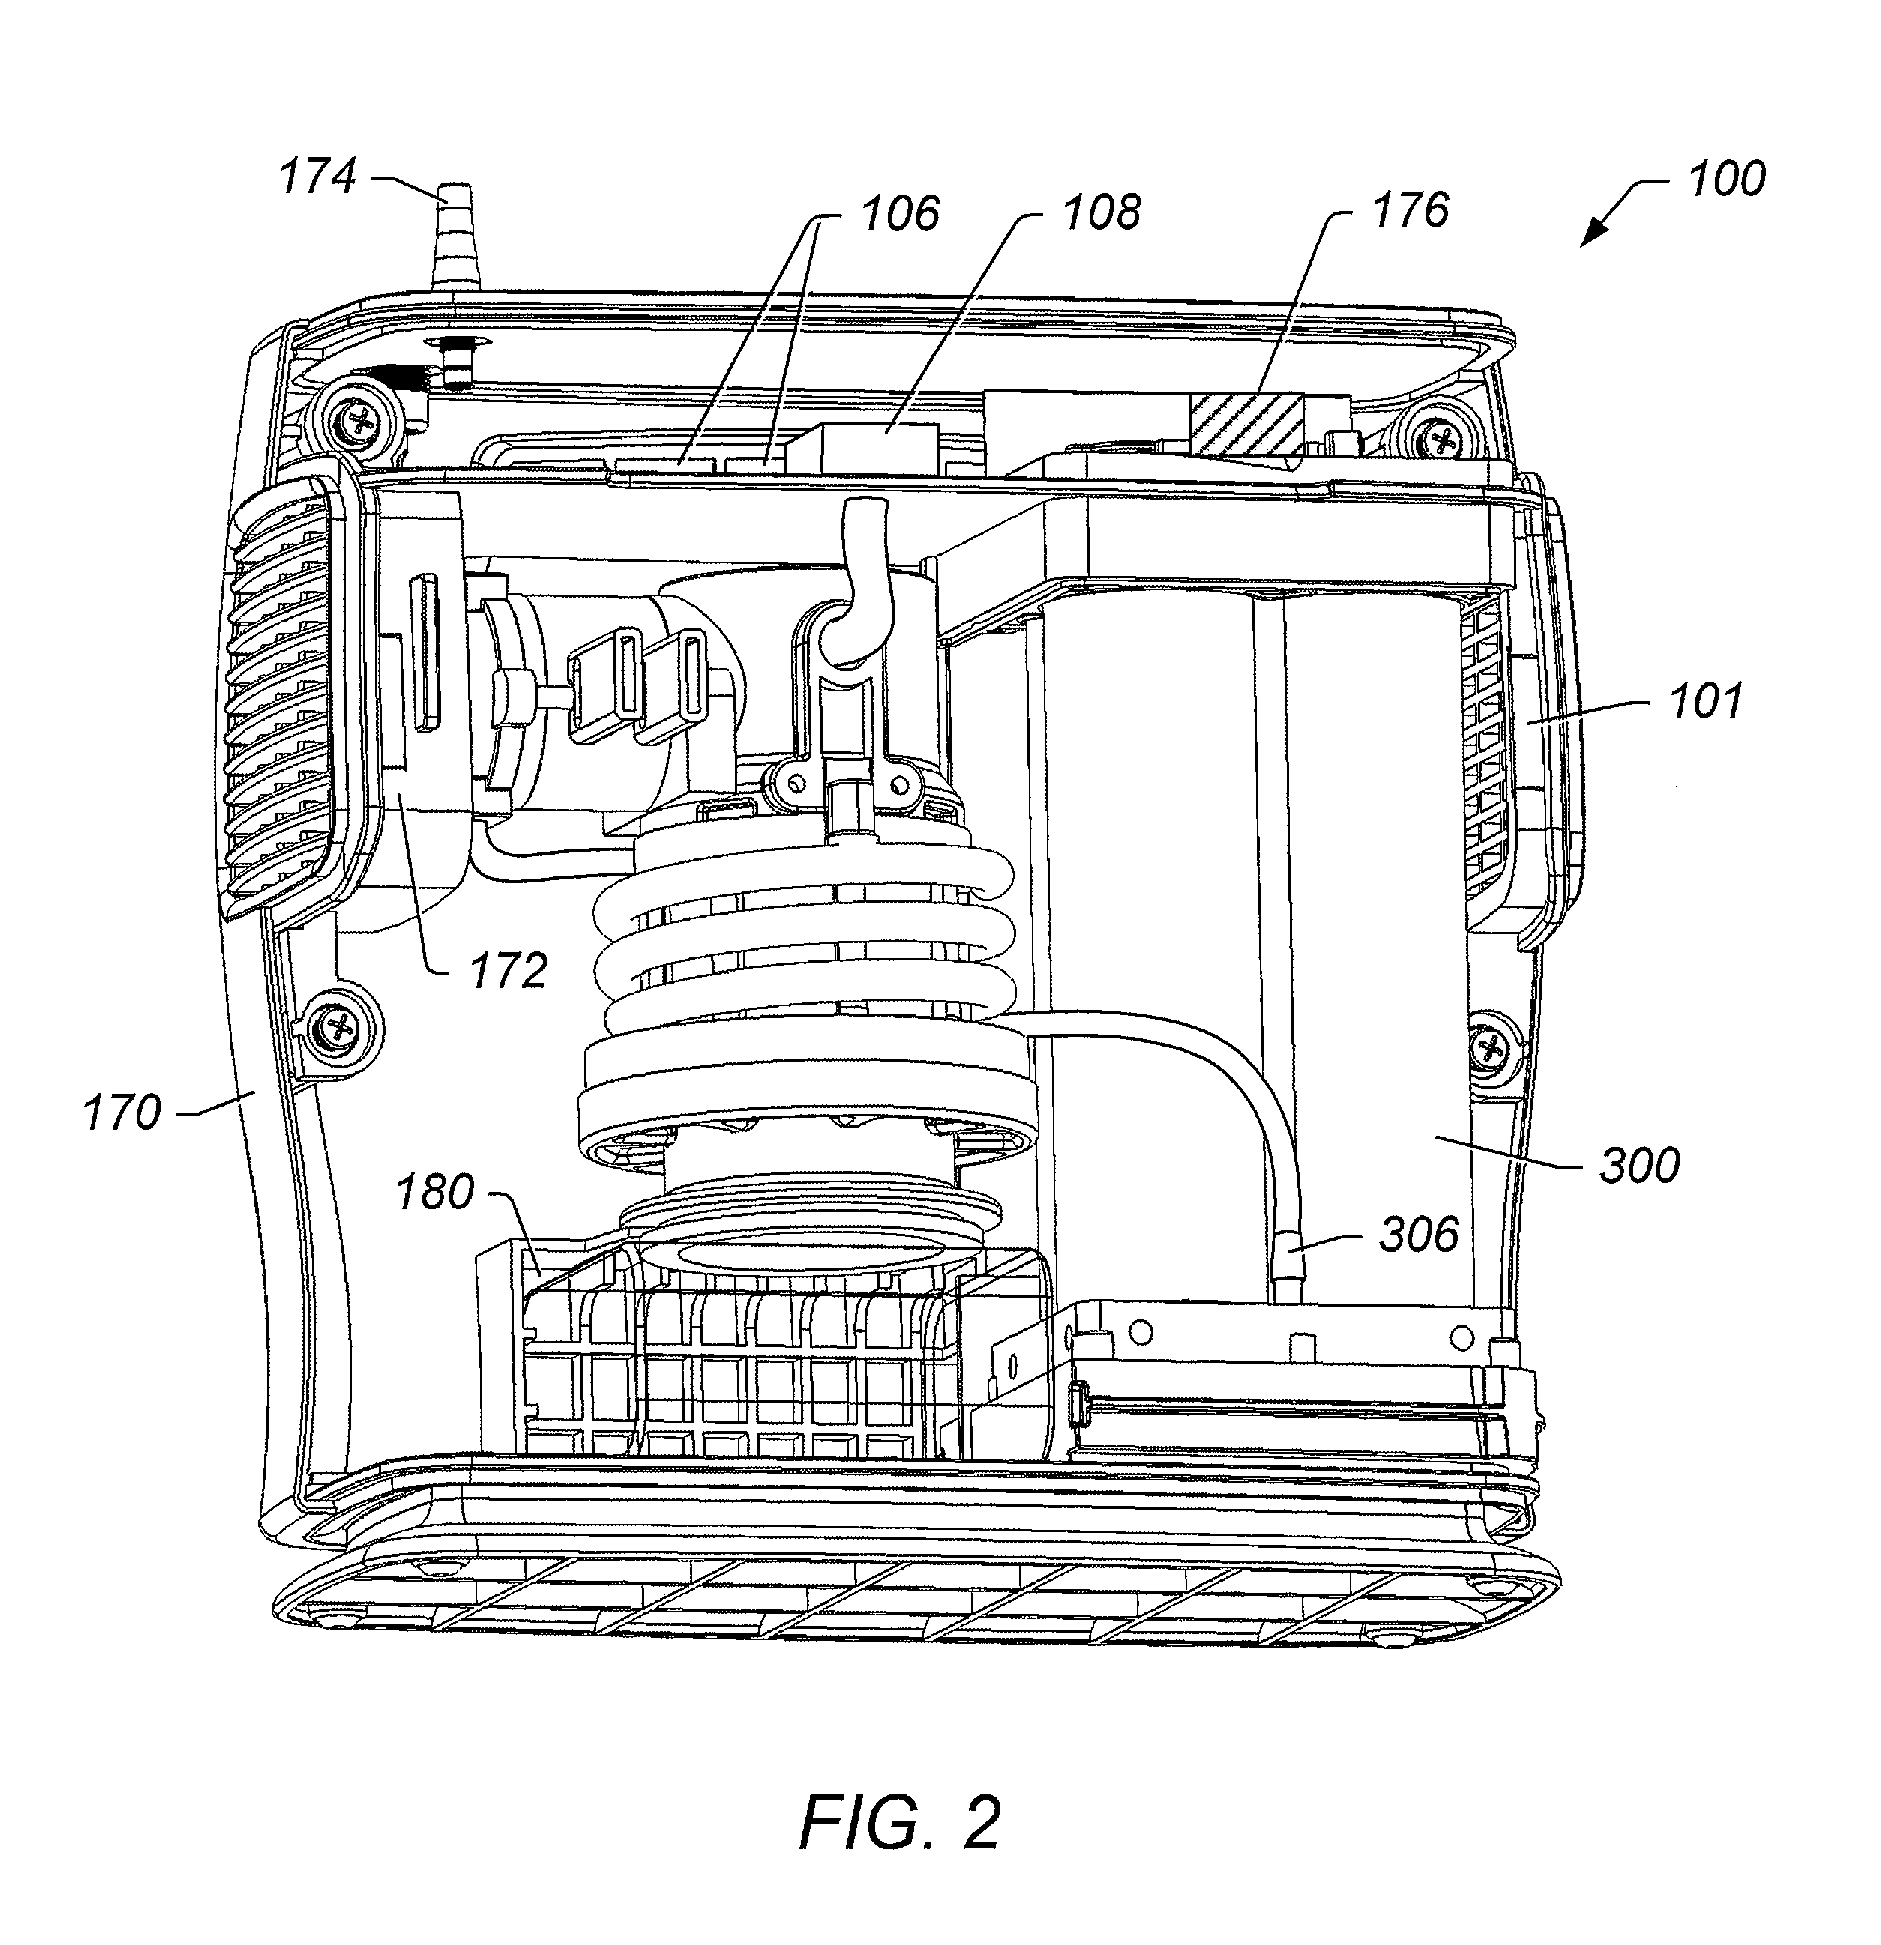 Oxygen concentrator apparatus configured for high altitude use